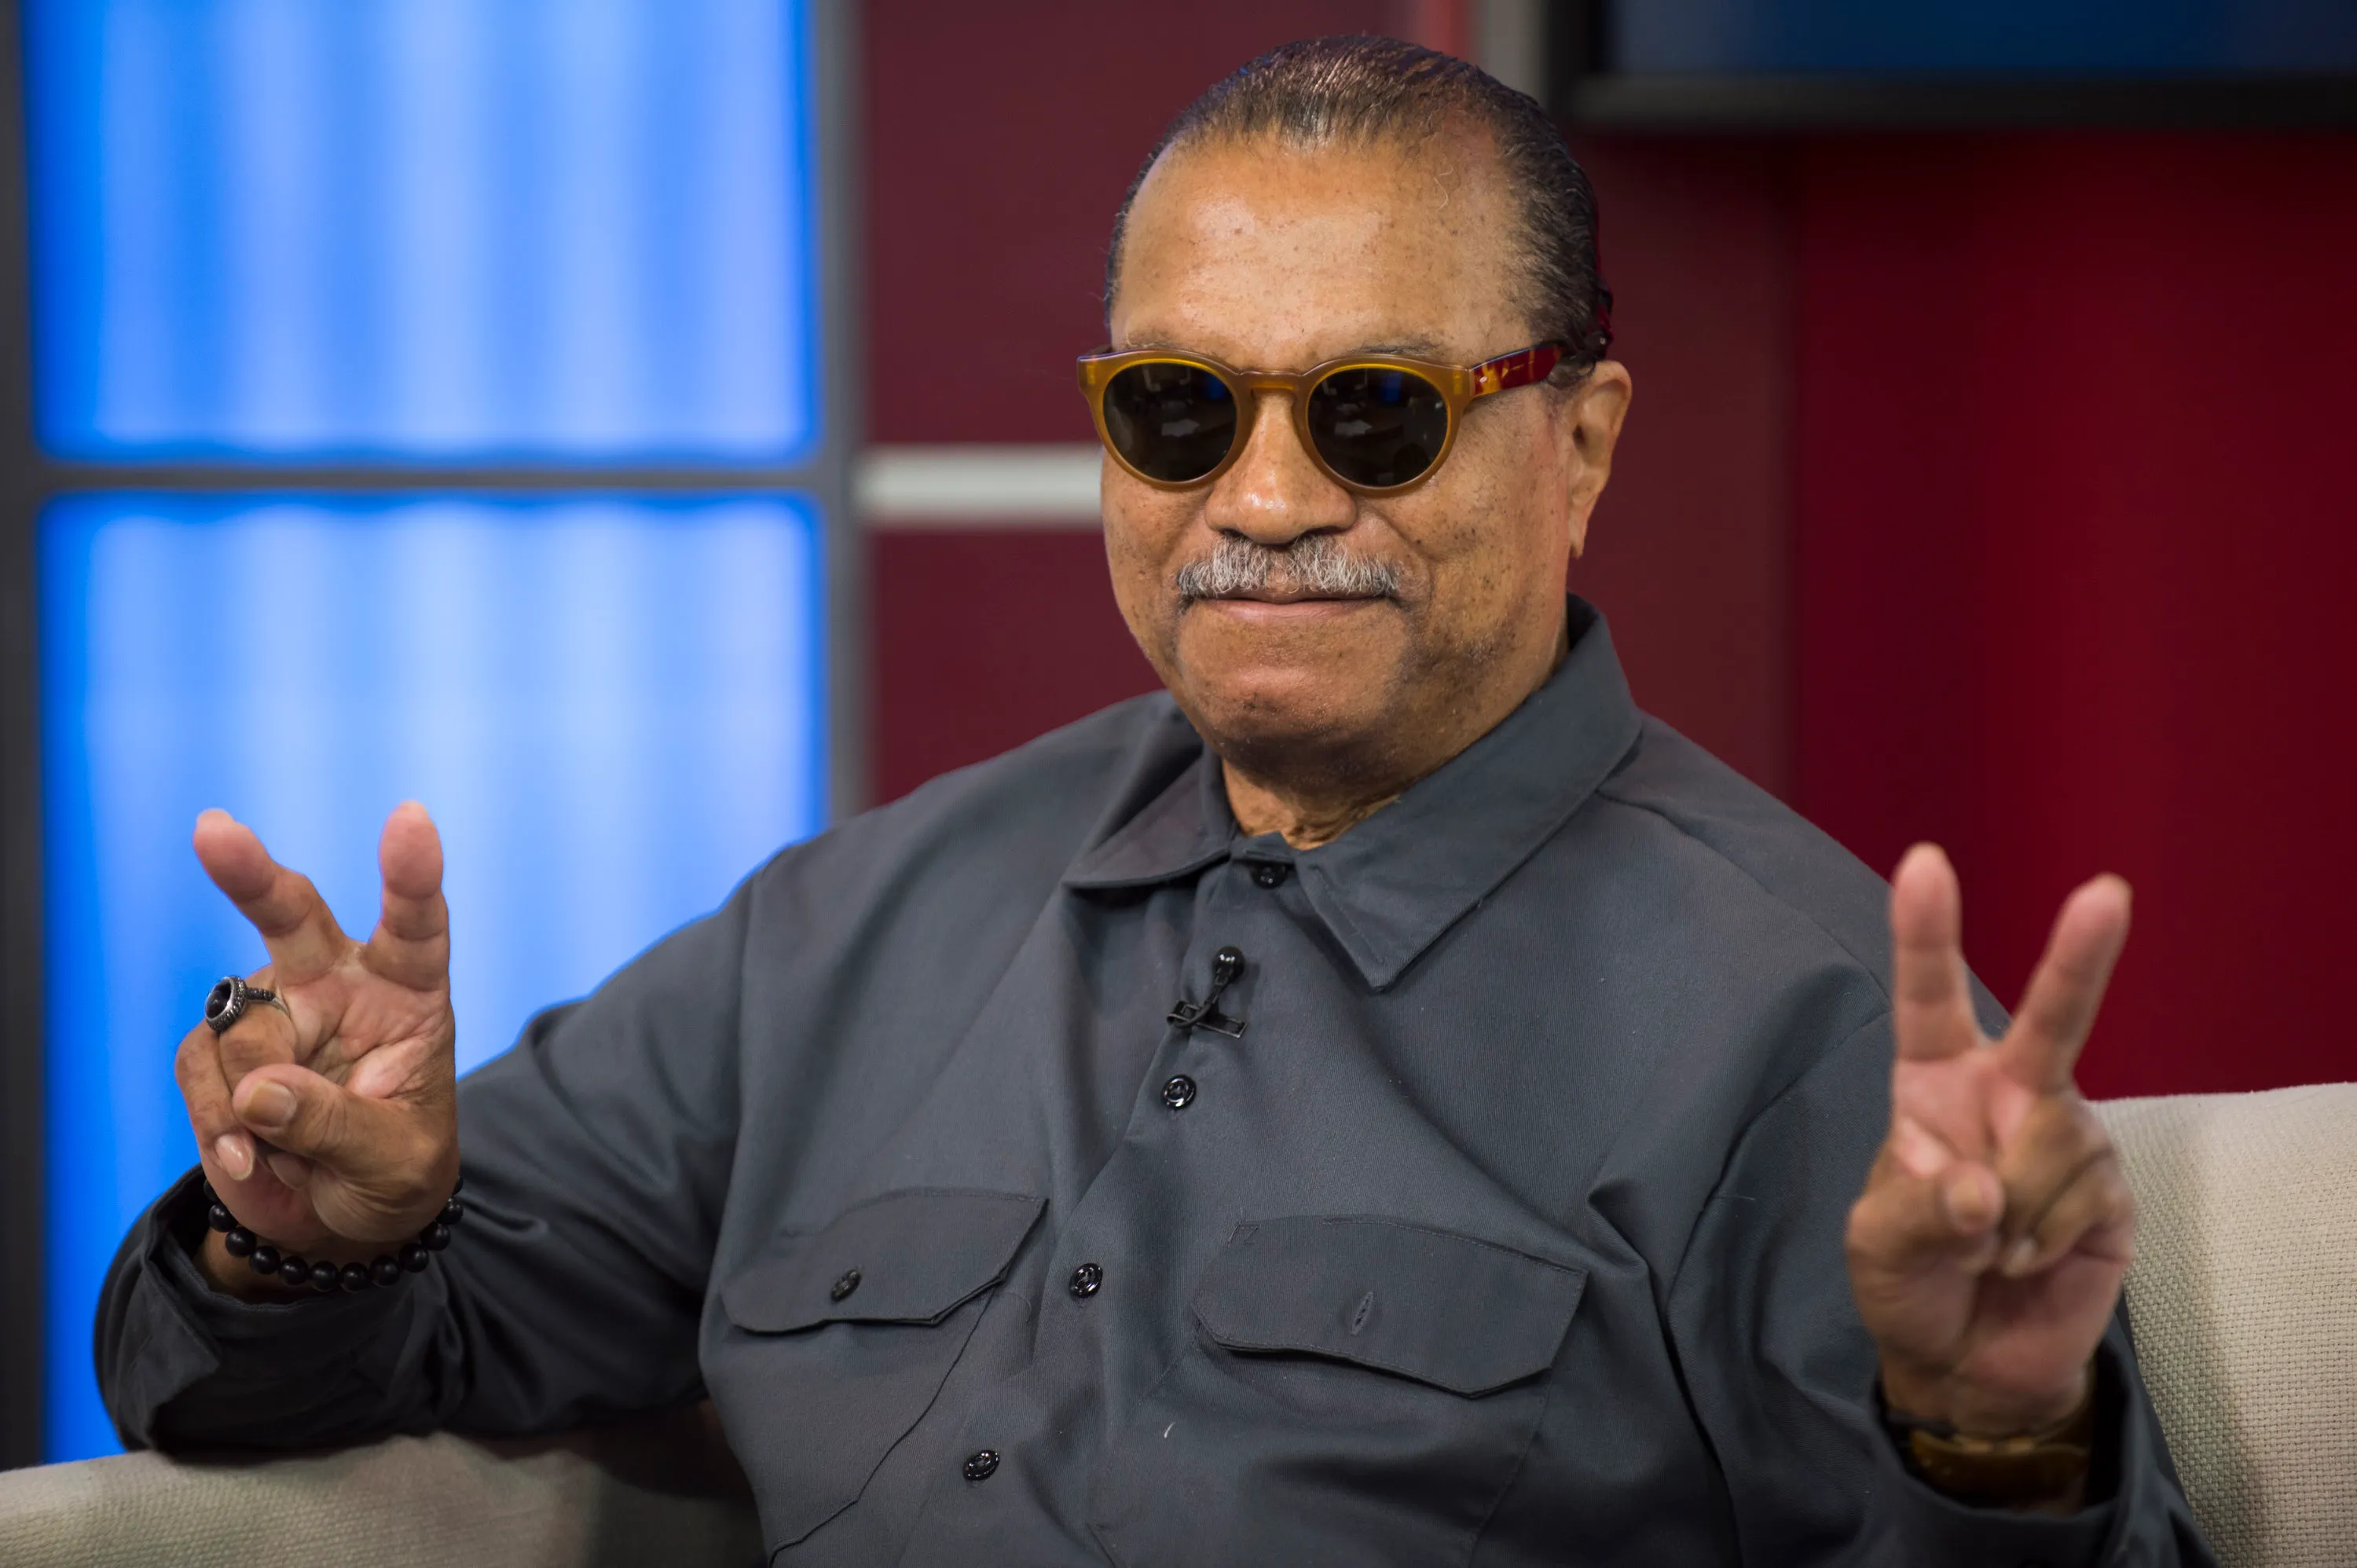 Billy Dee Williams Returns as Colt 45 Spokesman in New TV Ads